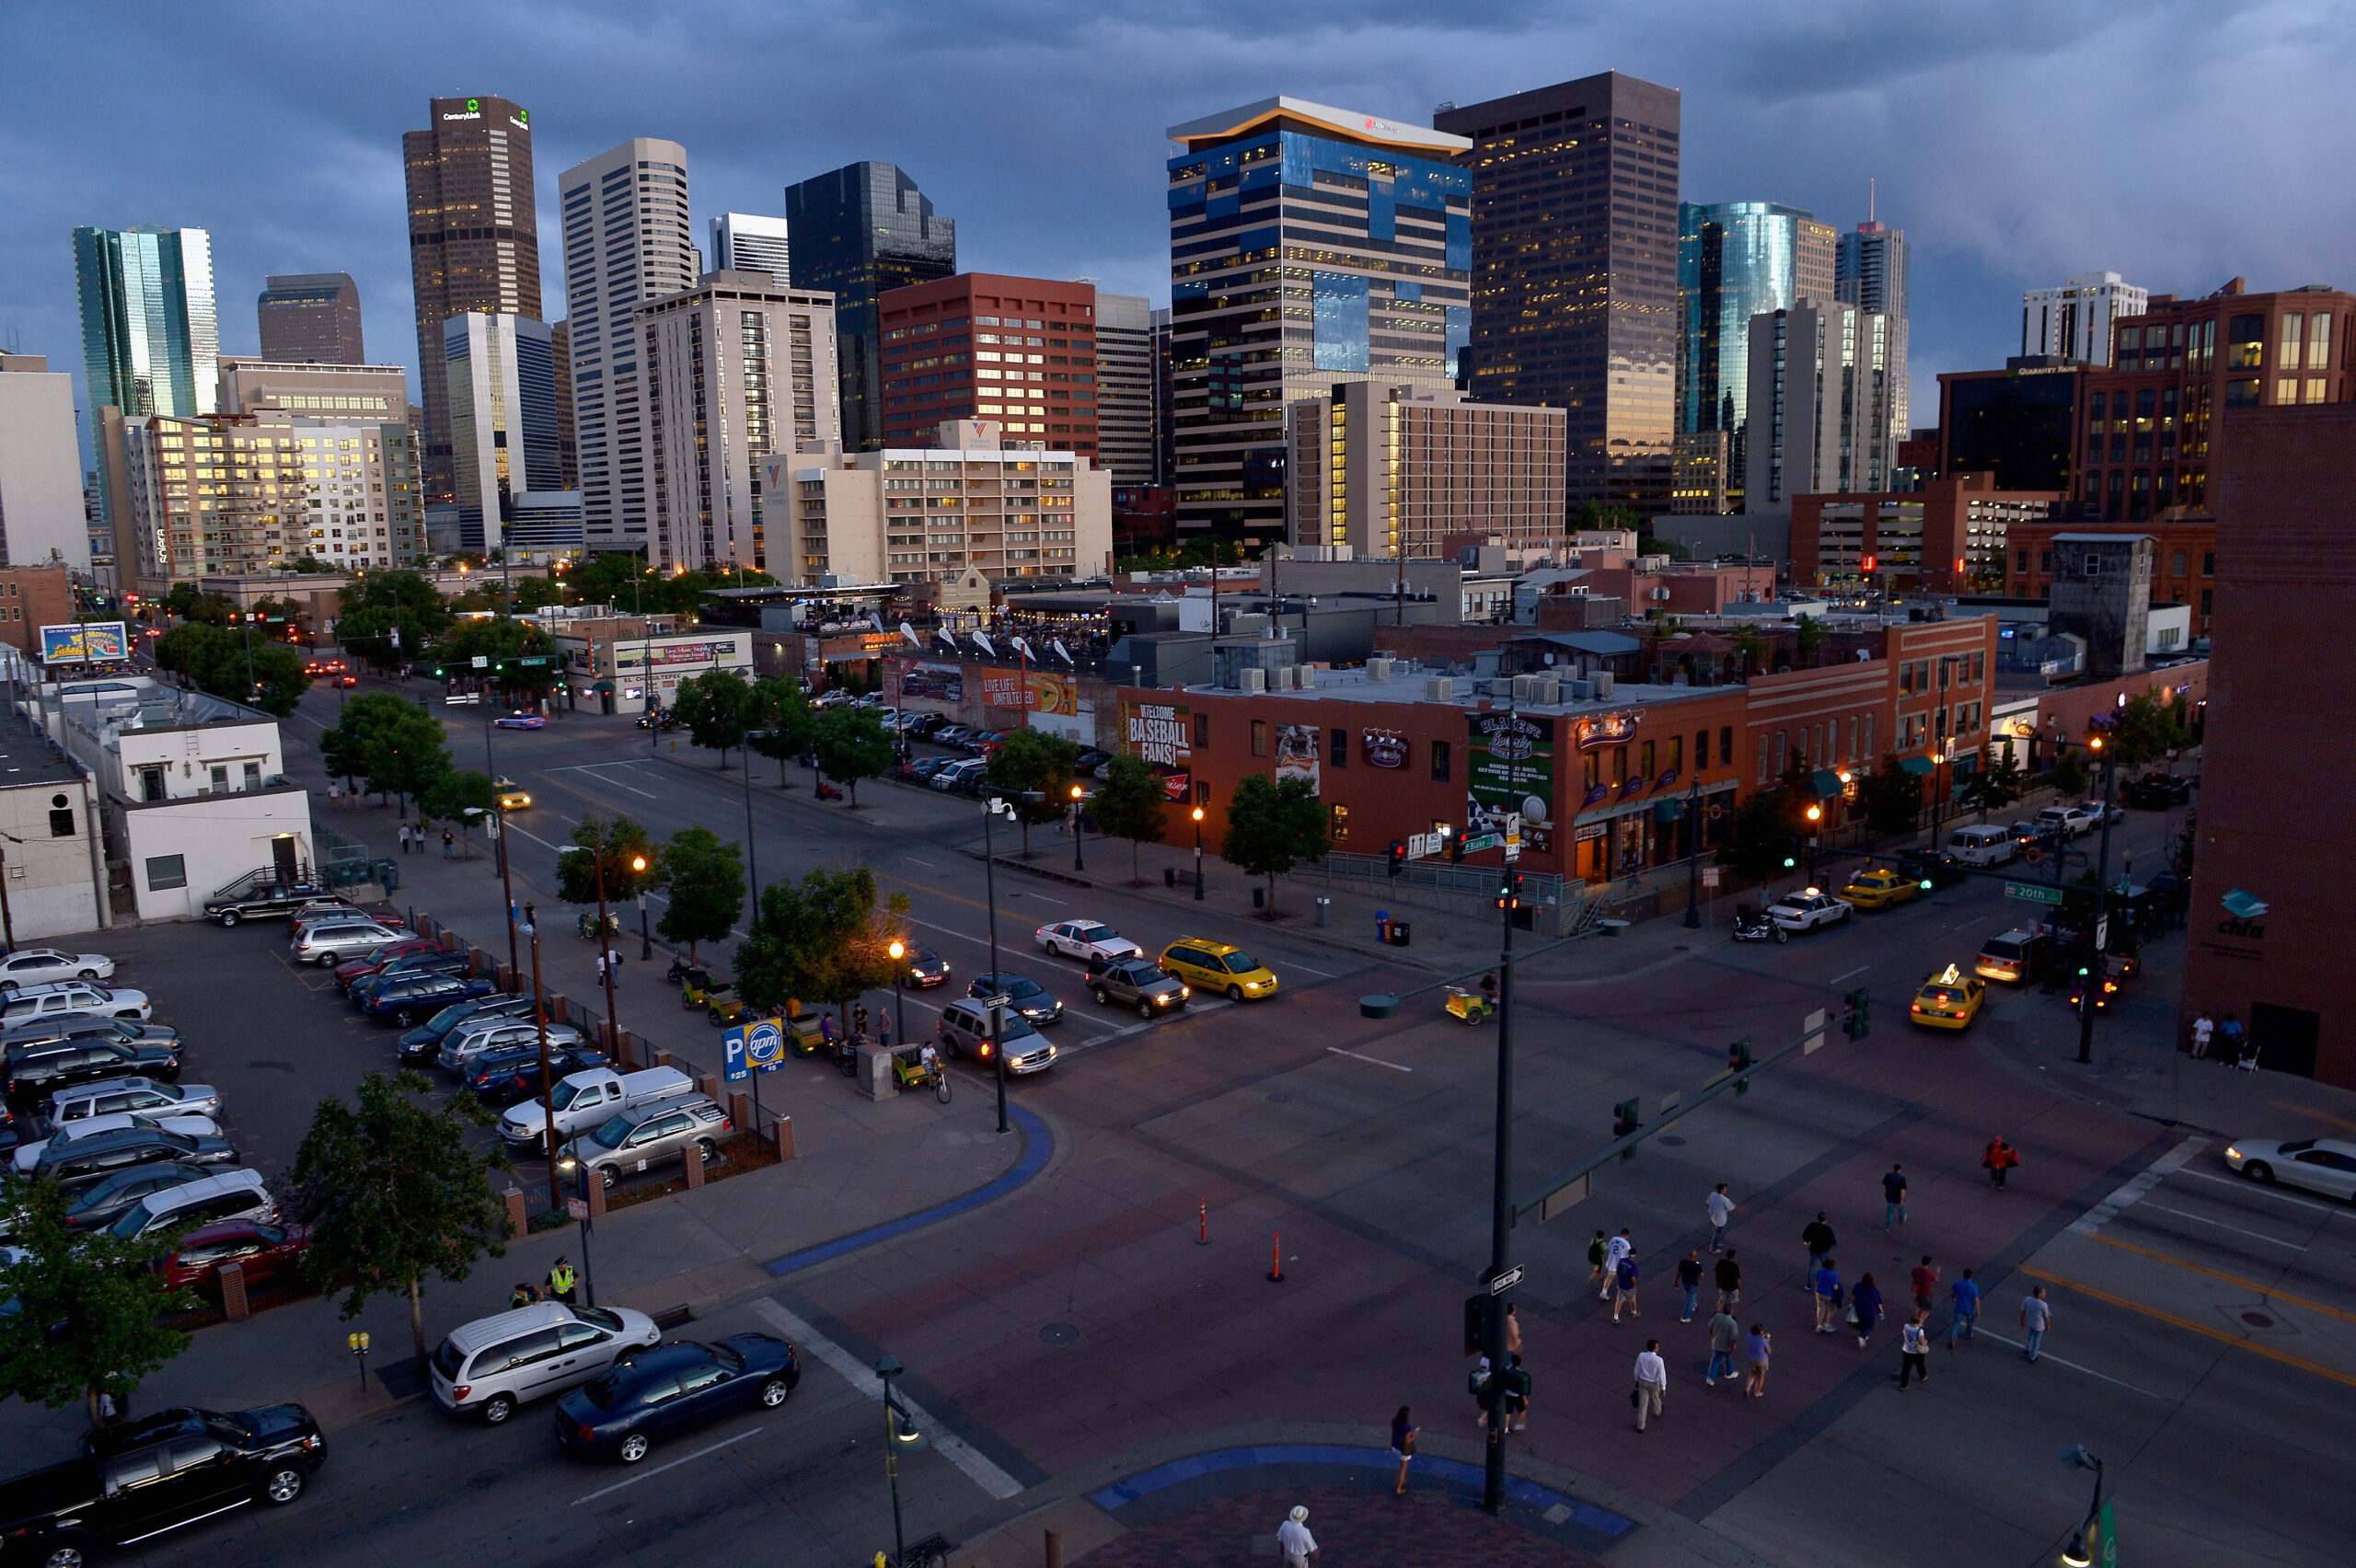 DENVER, CO - JUNE 13: A view of the intersection of 20th Street and Blake Street with the Denver sk...